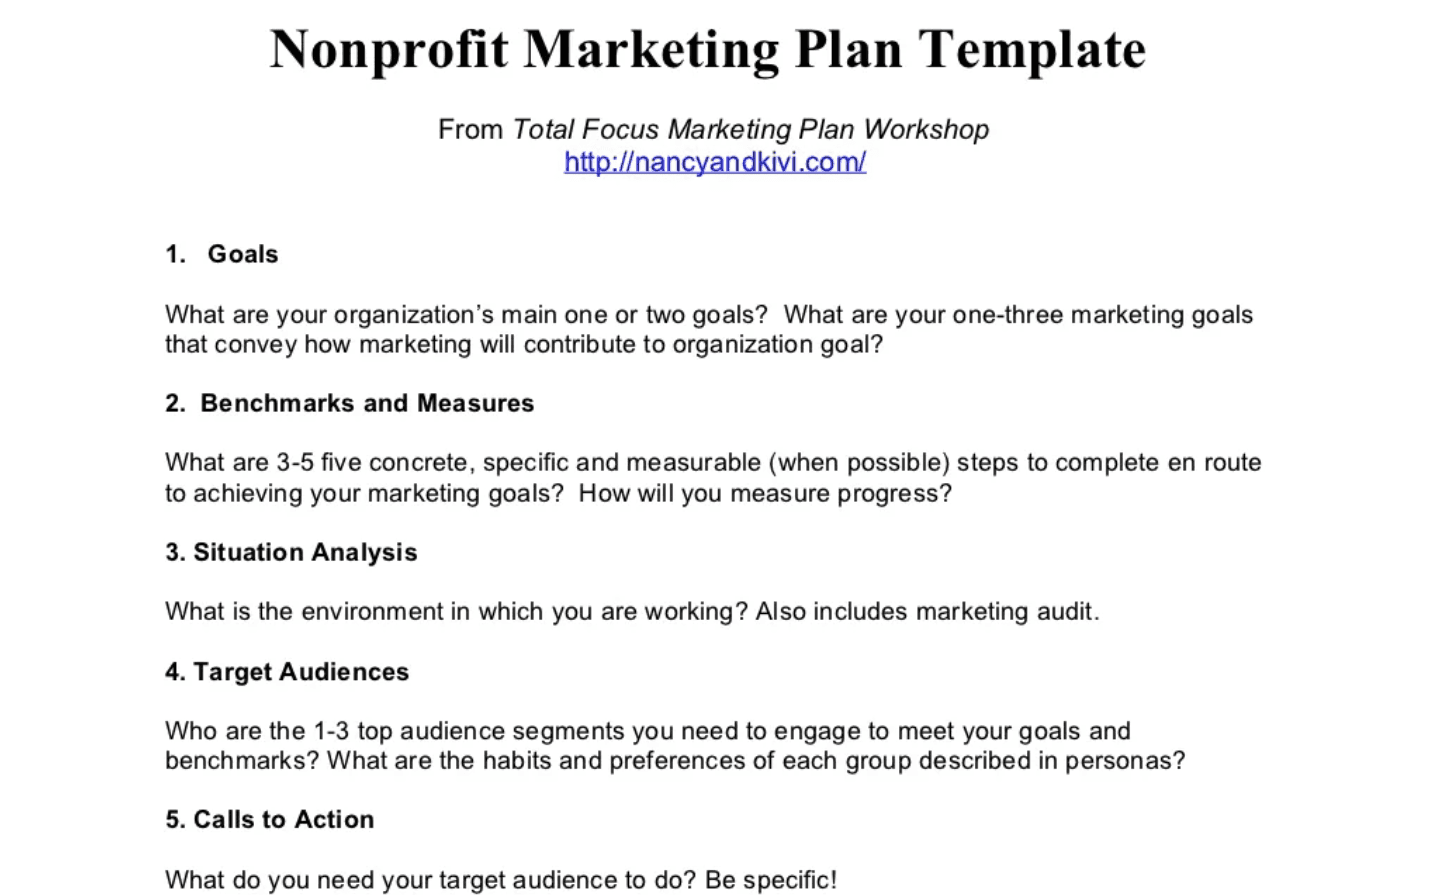 Example of a nonprofit marketing plan template